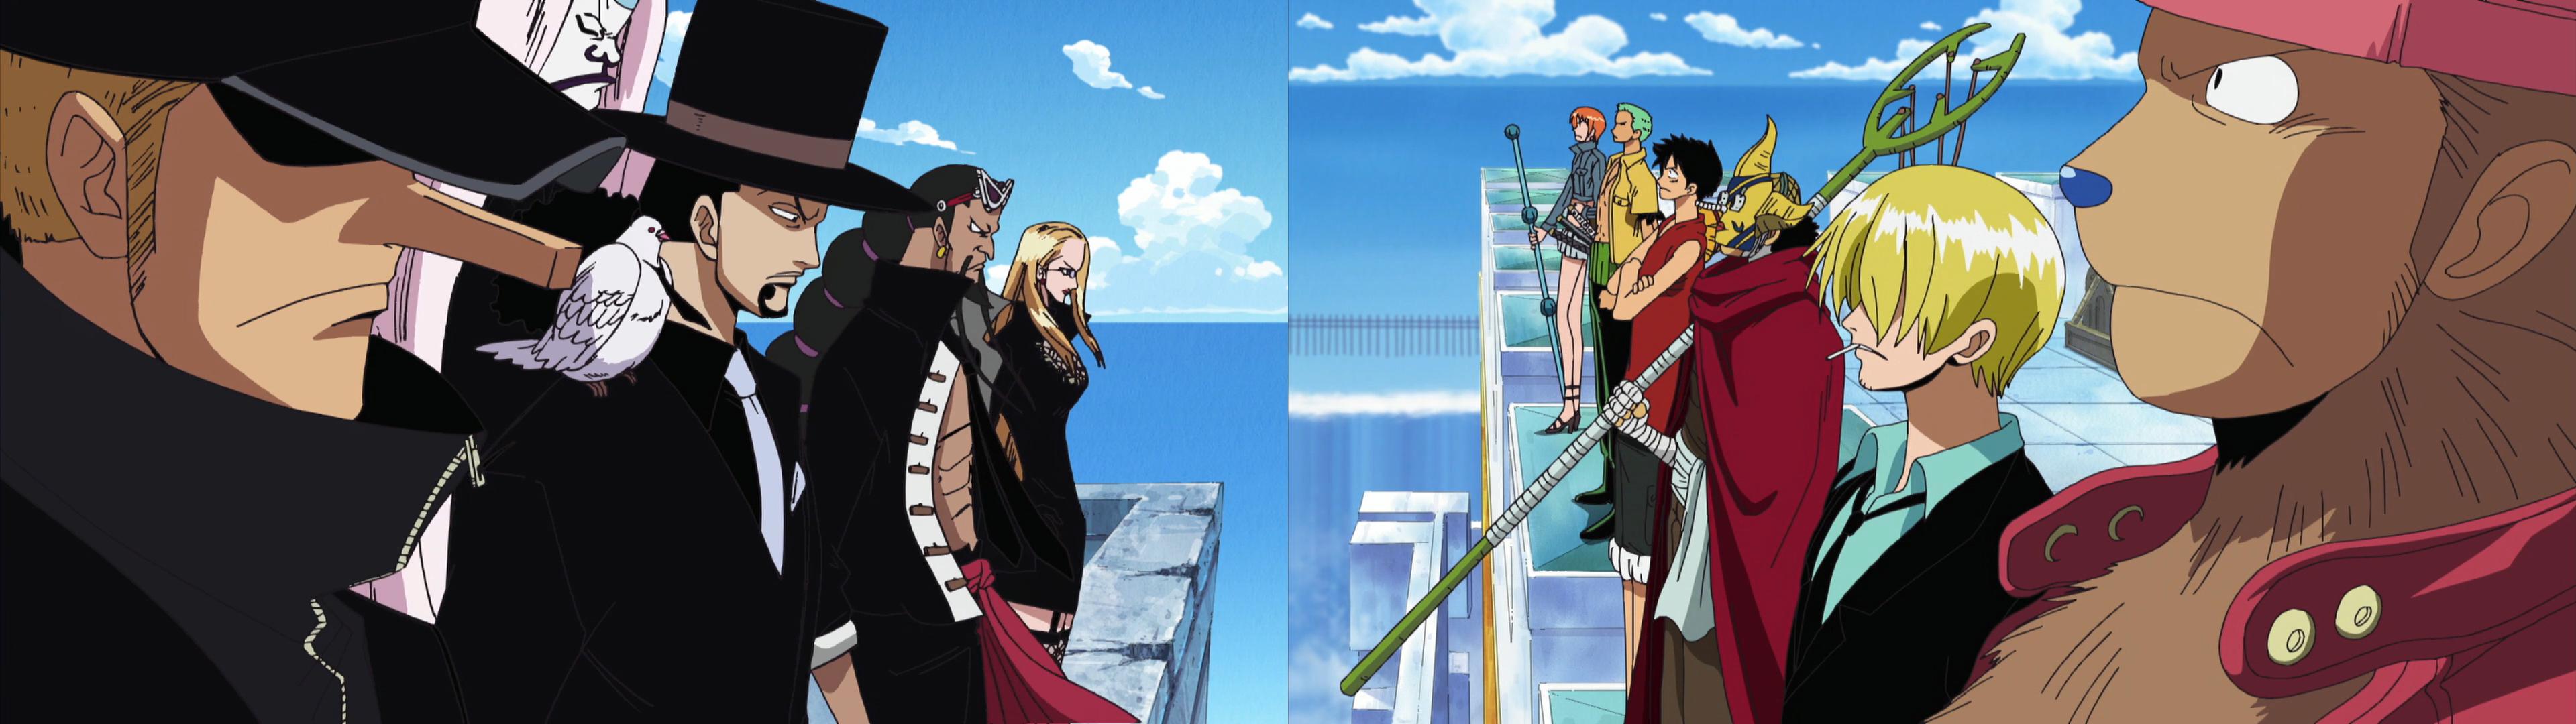 One Piece Dual Monitor Wallpapers - Top Free One Piece ...